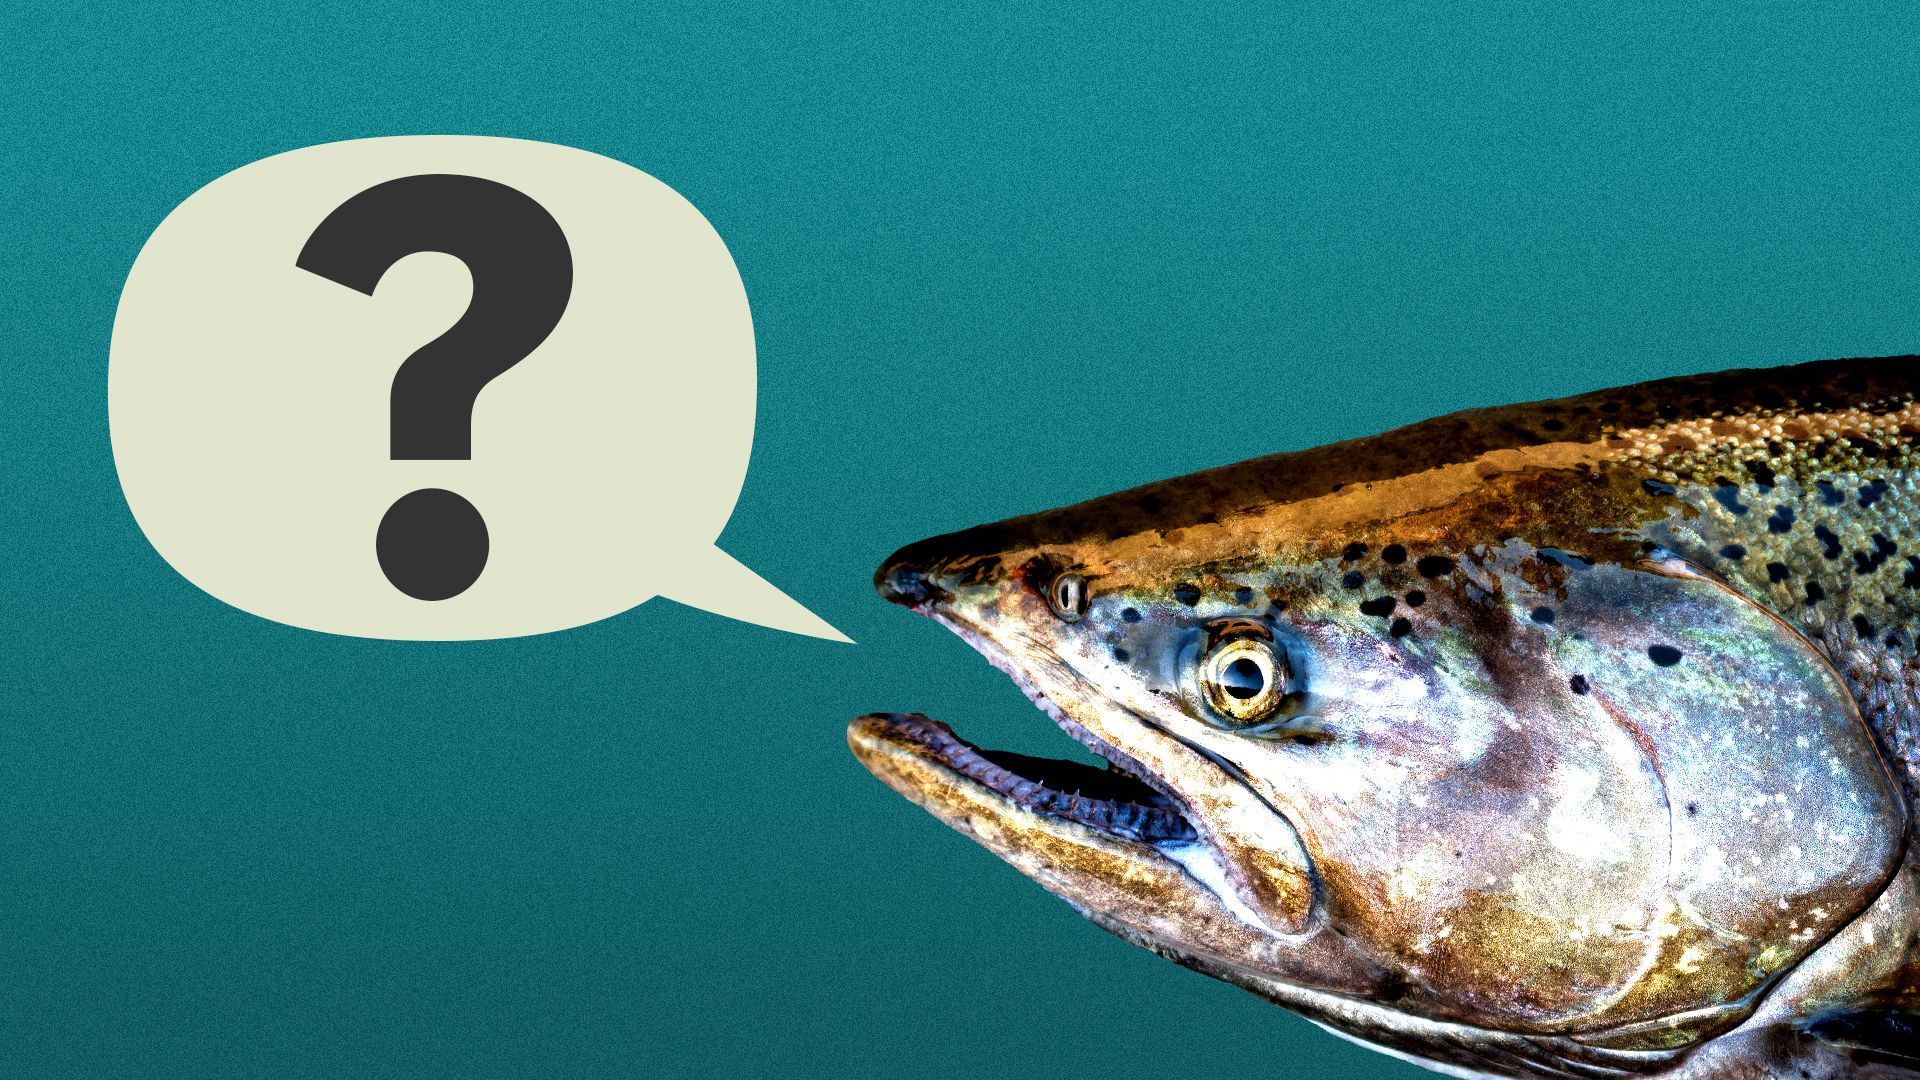 Illustration of a salmon with a word balloon with a question mark in it coming out of its mouth.